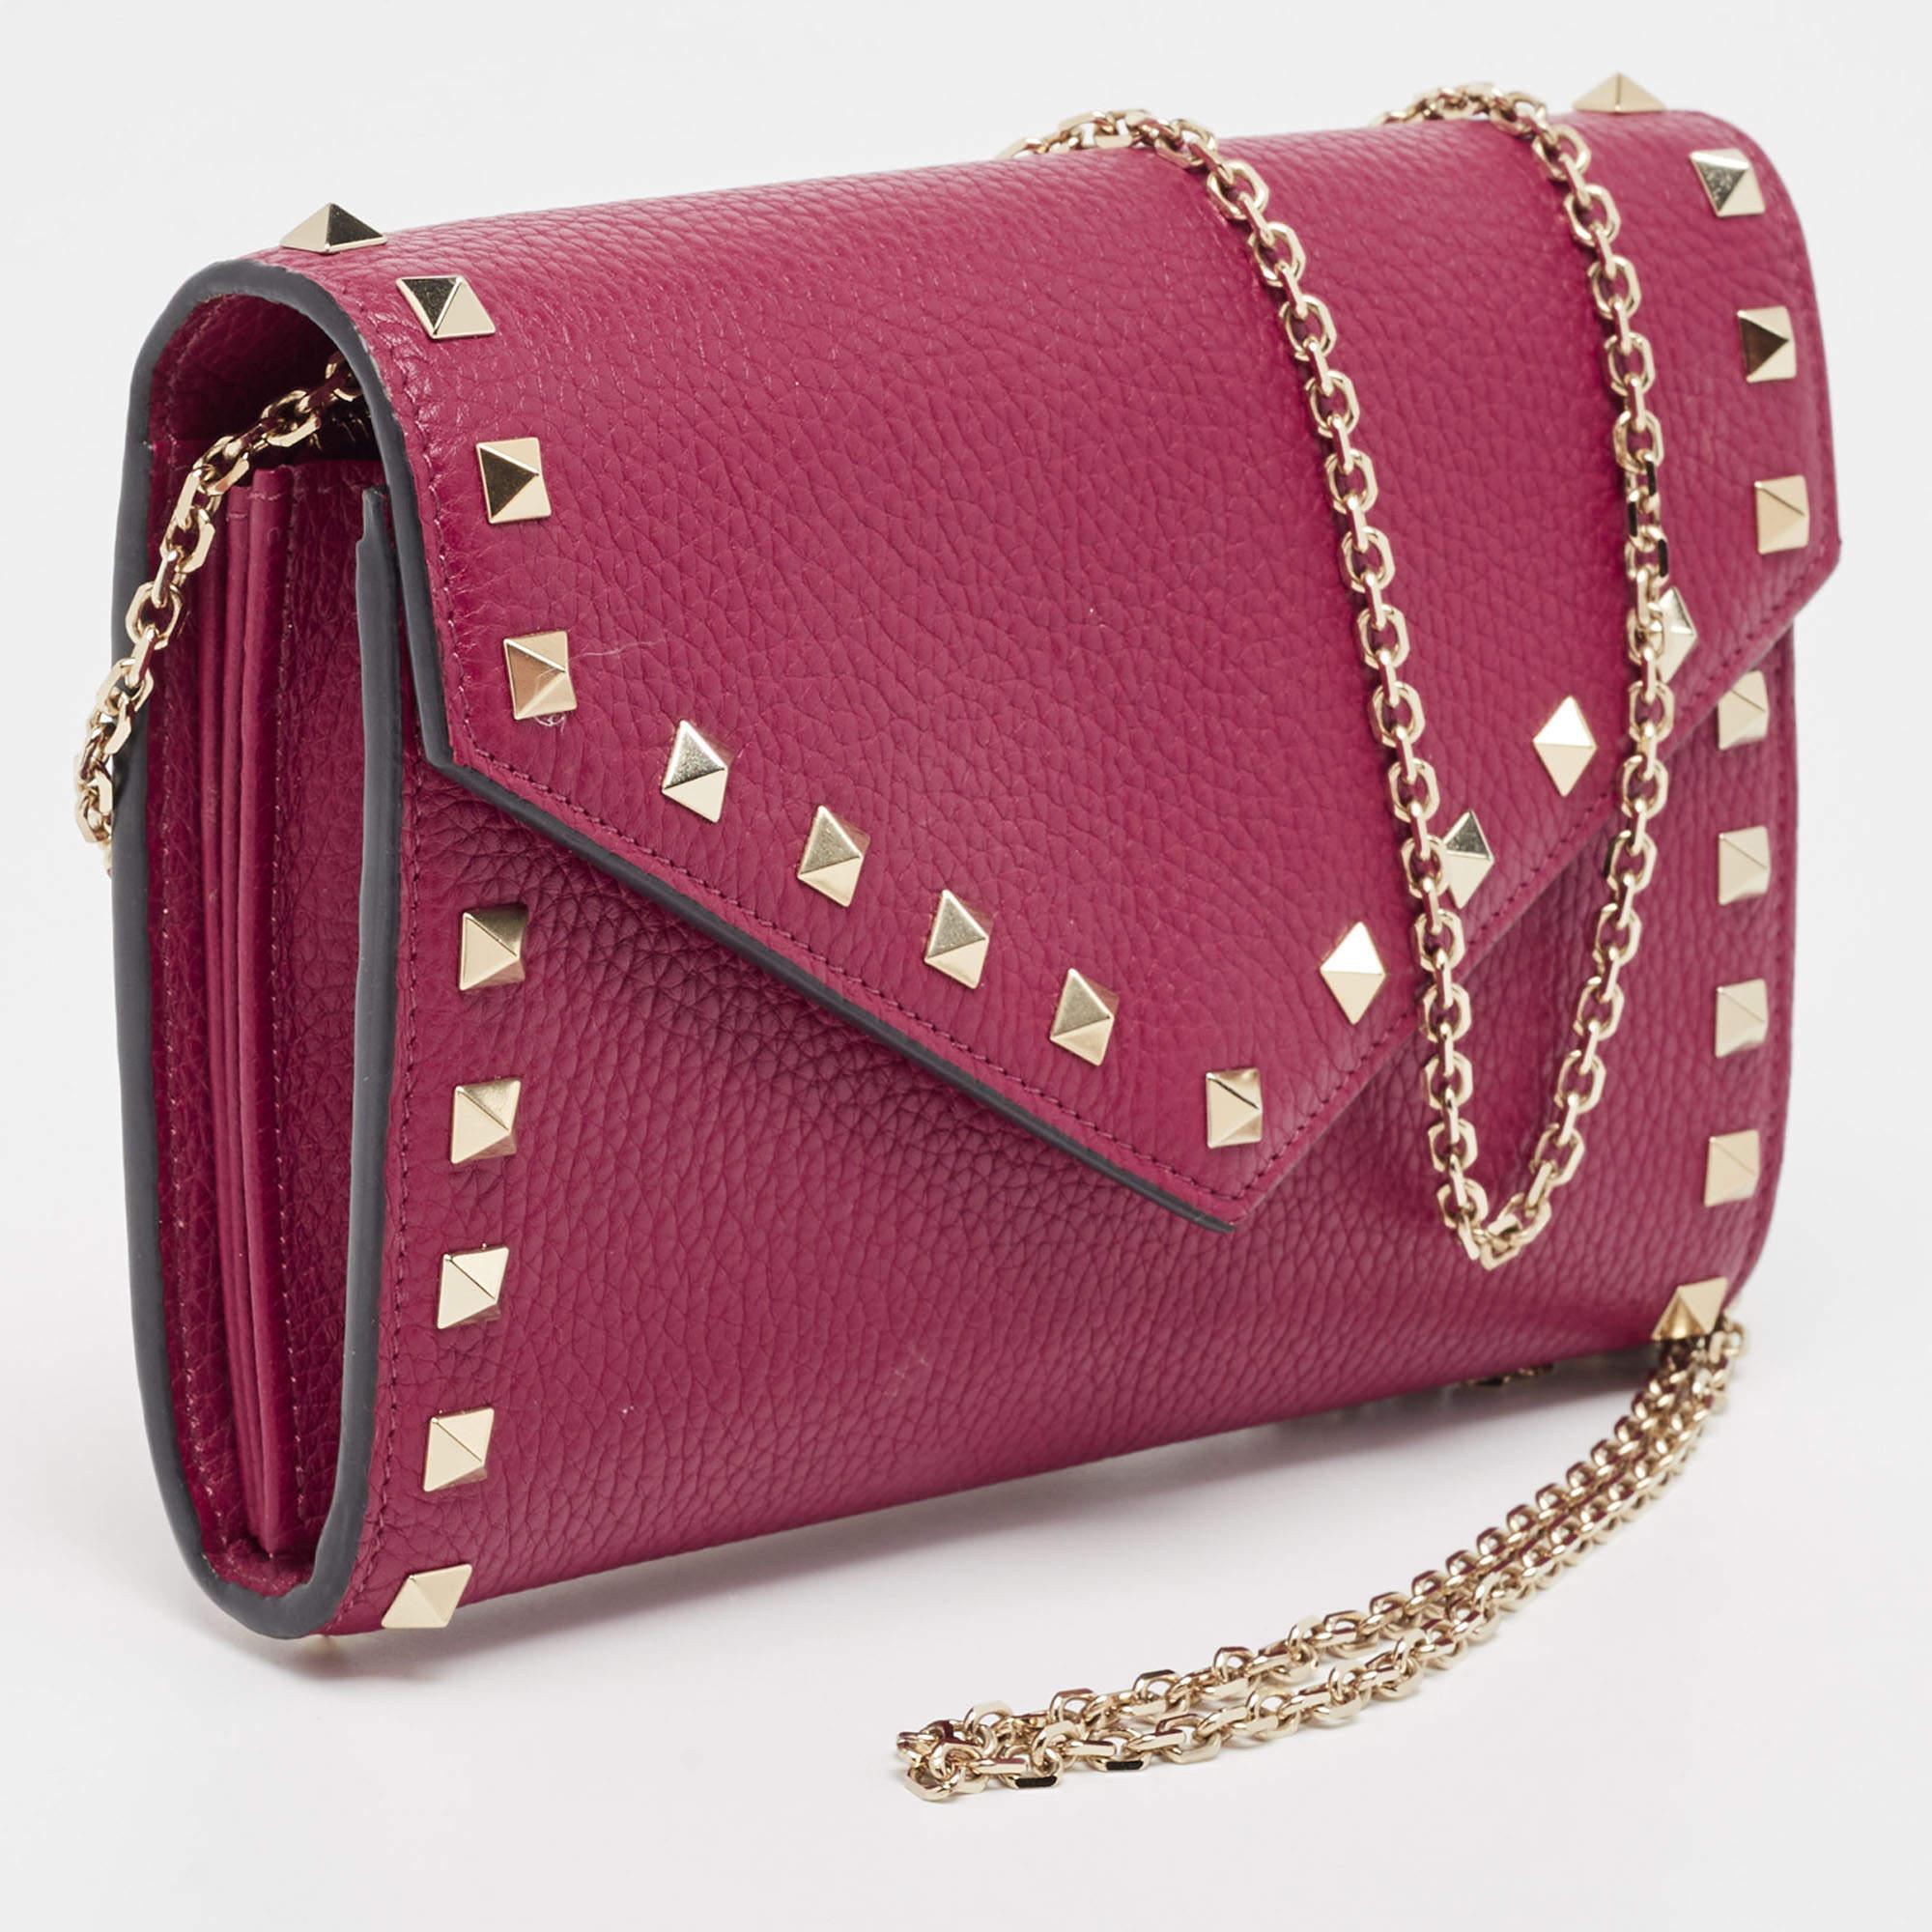 Valentino Pink Leather Rockstud Envelope Wallet on Chain In Excellent Condition For Sale In Dubai, Al Qouz 2